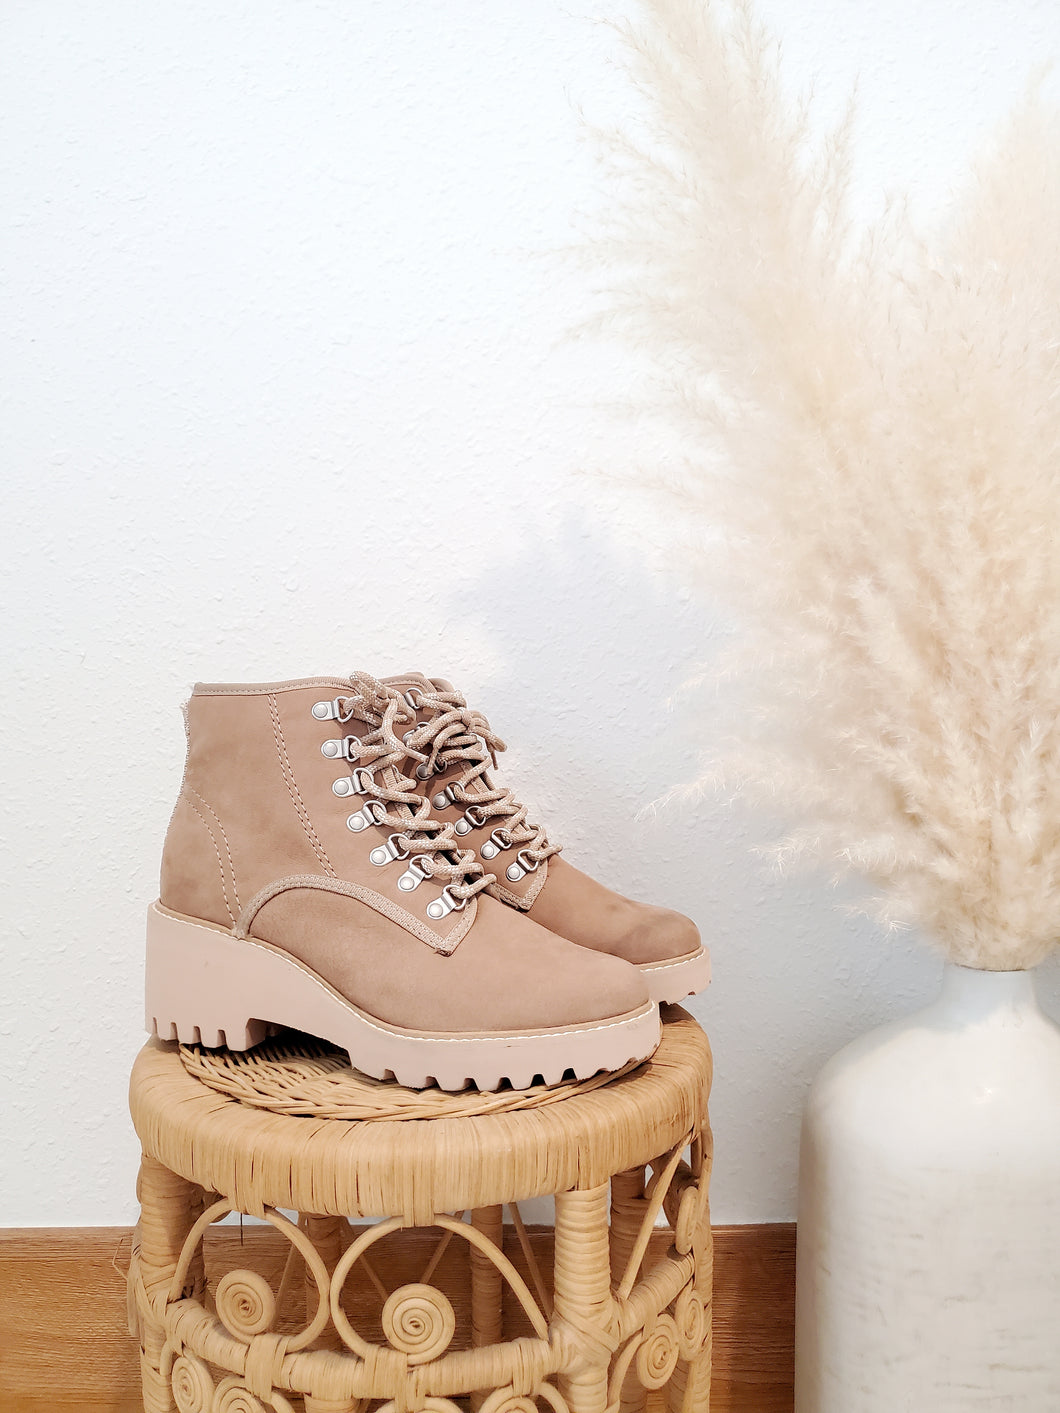 Dolce Vita Lace Up Boots (8.5)